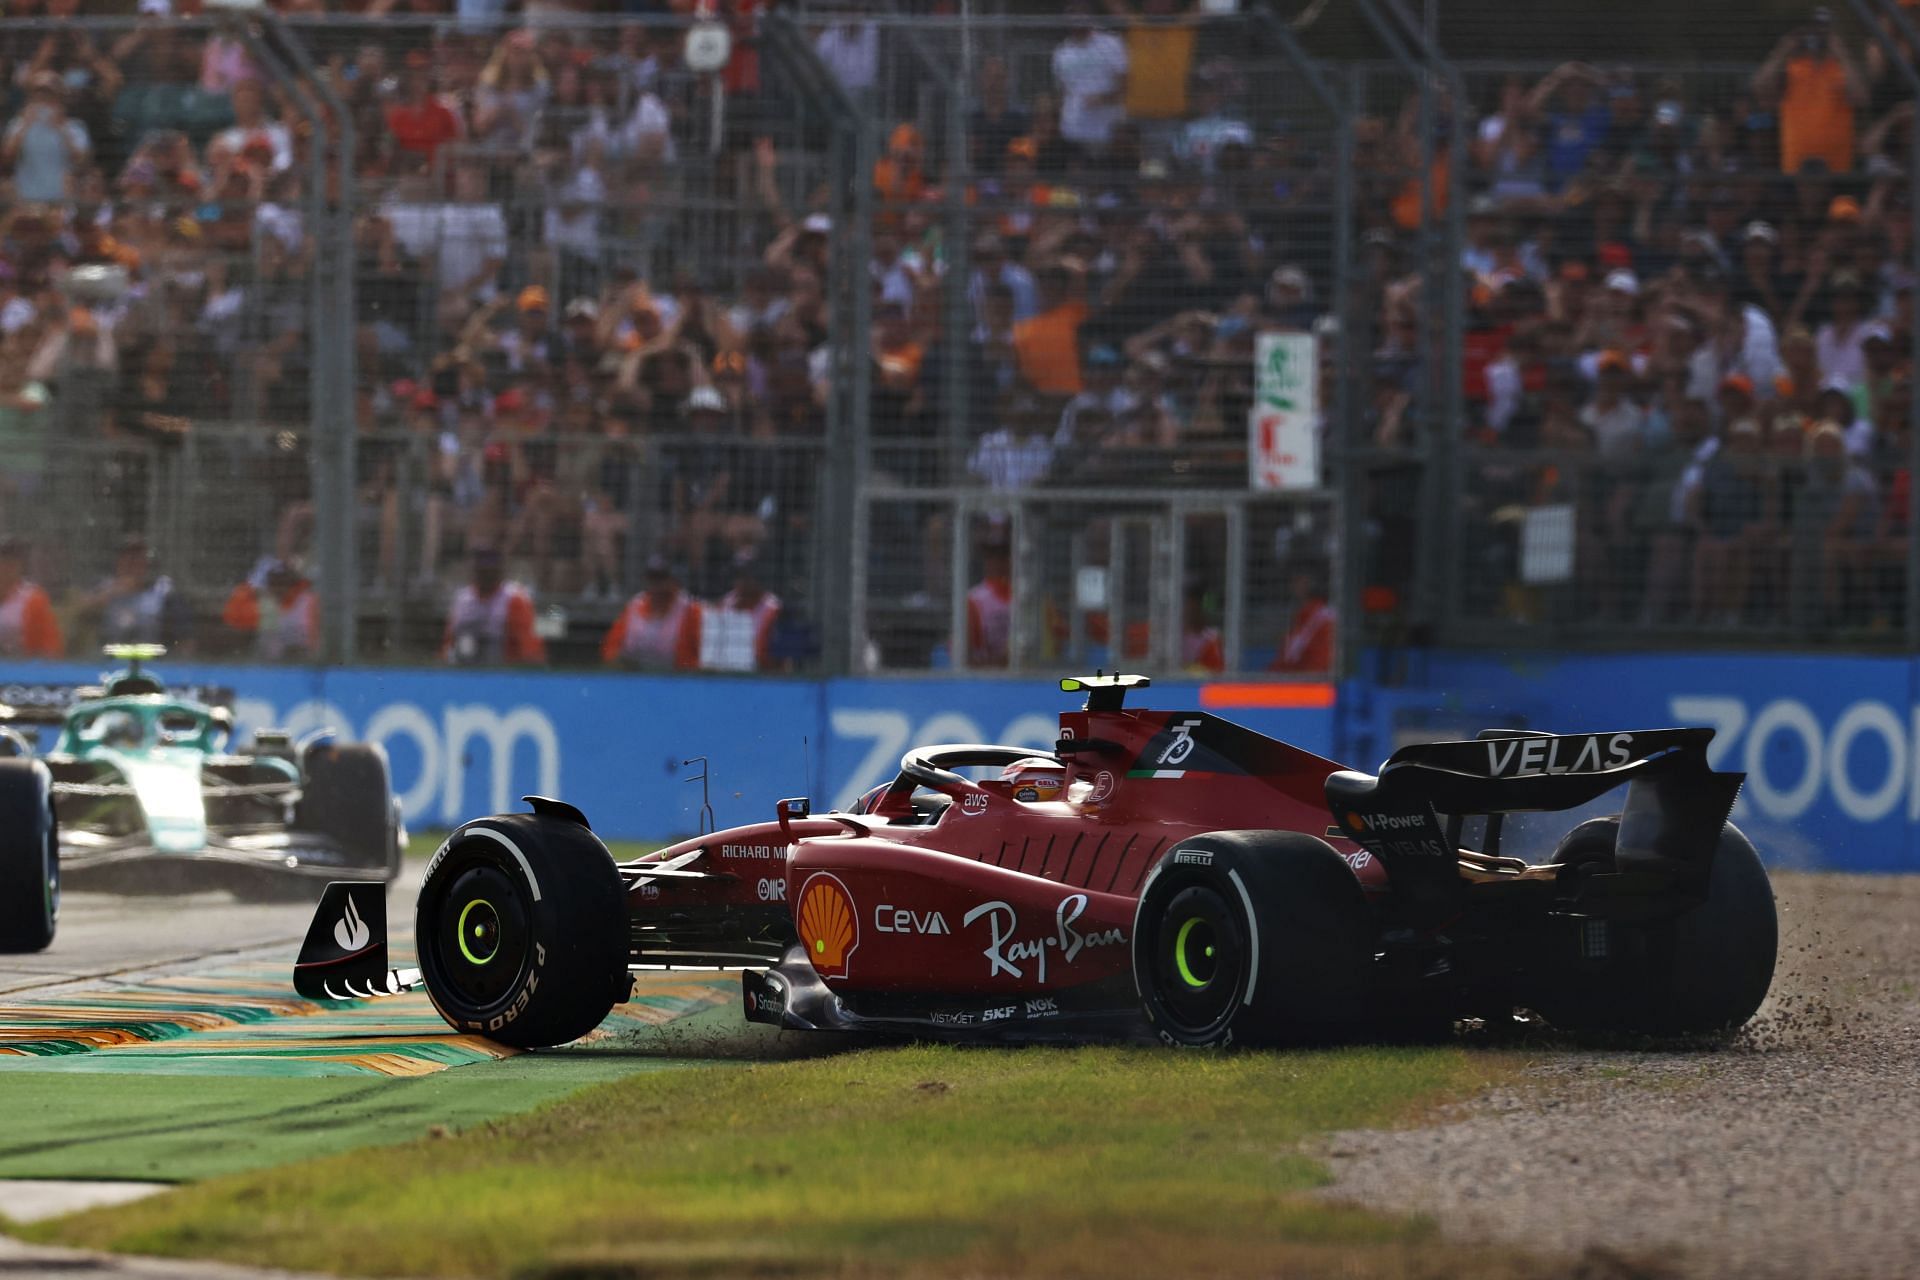 Ferrari&#039;s Carlos Sainz after spinning out of the 2022 F1 Australian GP (Photo by Robert Cianflone/Getty Images)